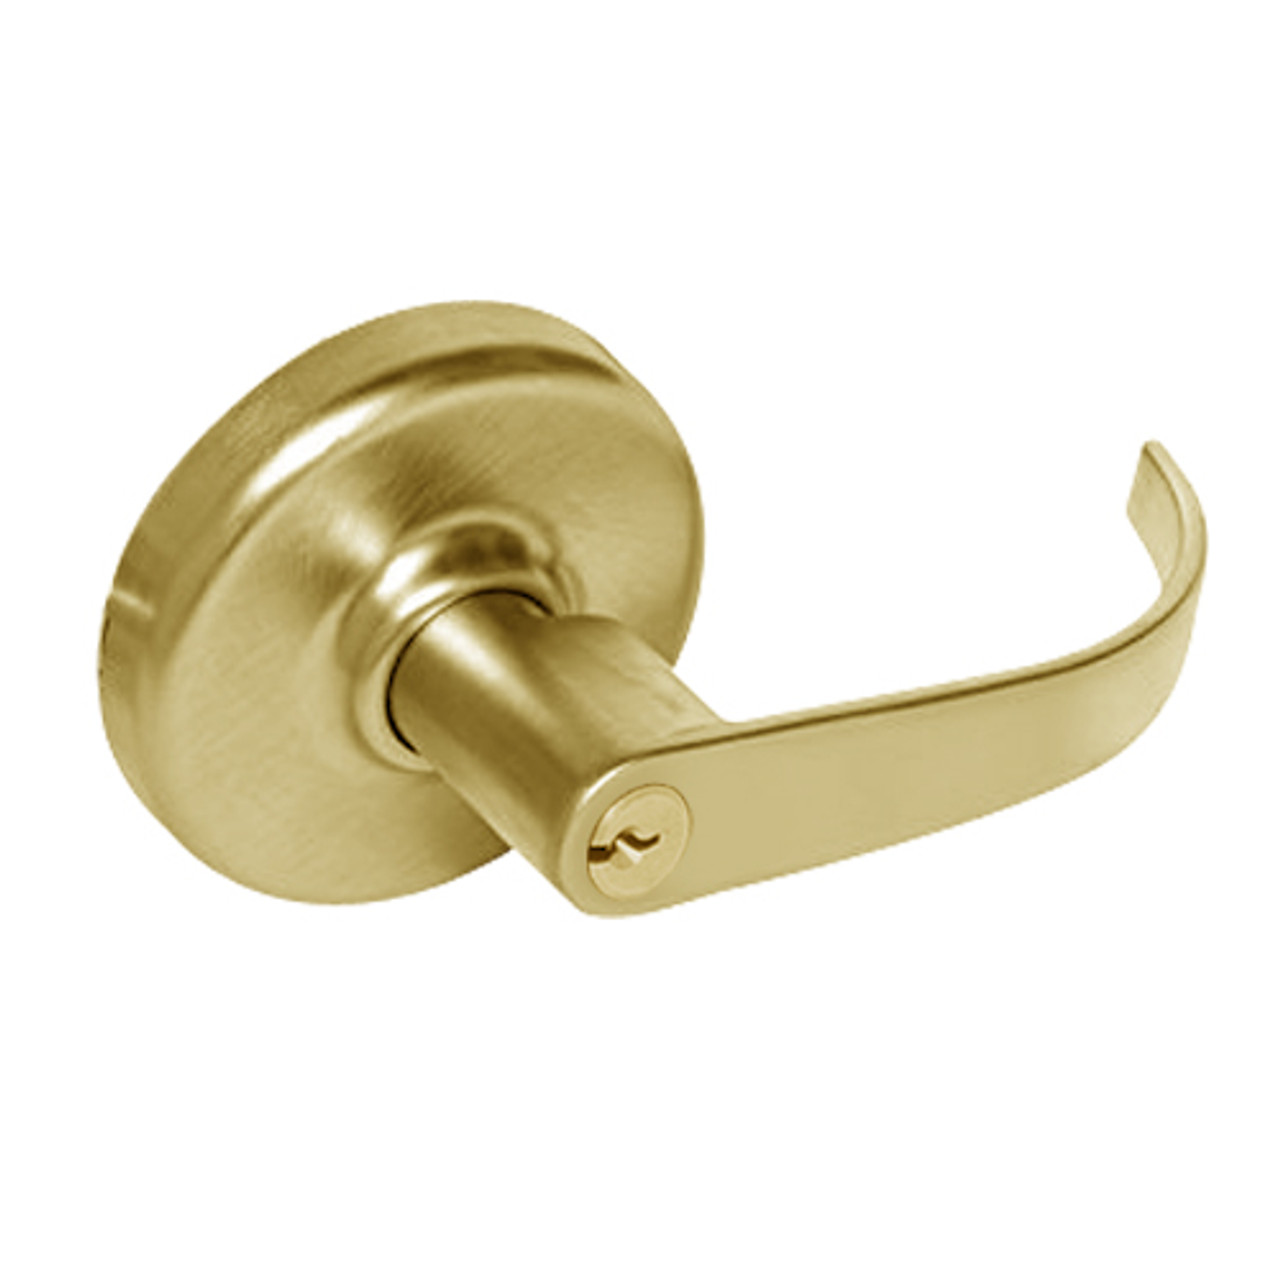 CL3375-PZD-605 Corbin CL3300 Series Extra Heavy Duty Corridor/Dormitory Cylindrical Locksets with Princeton Lever in Bright Brass Finish